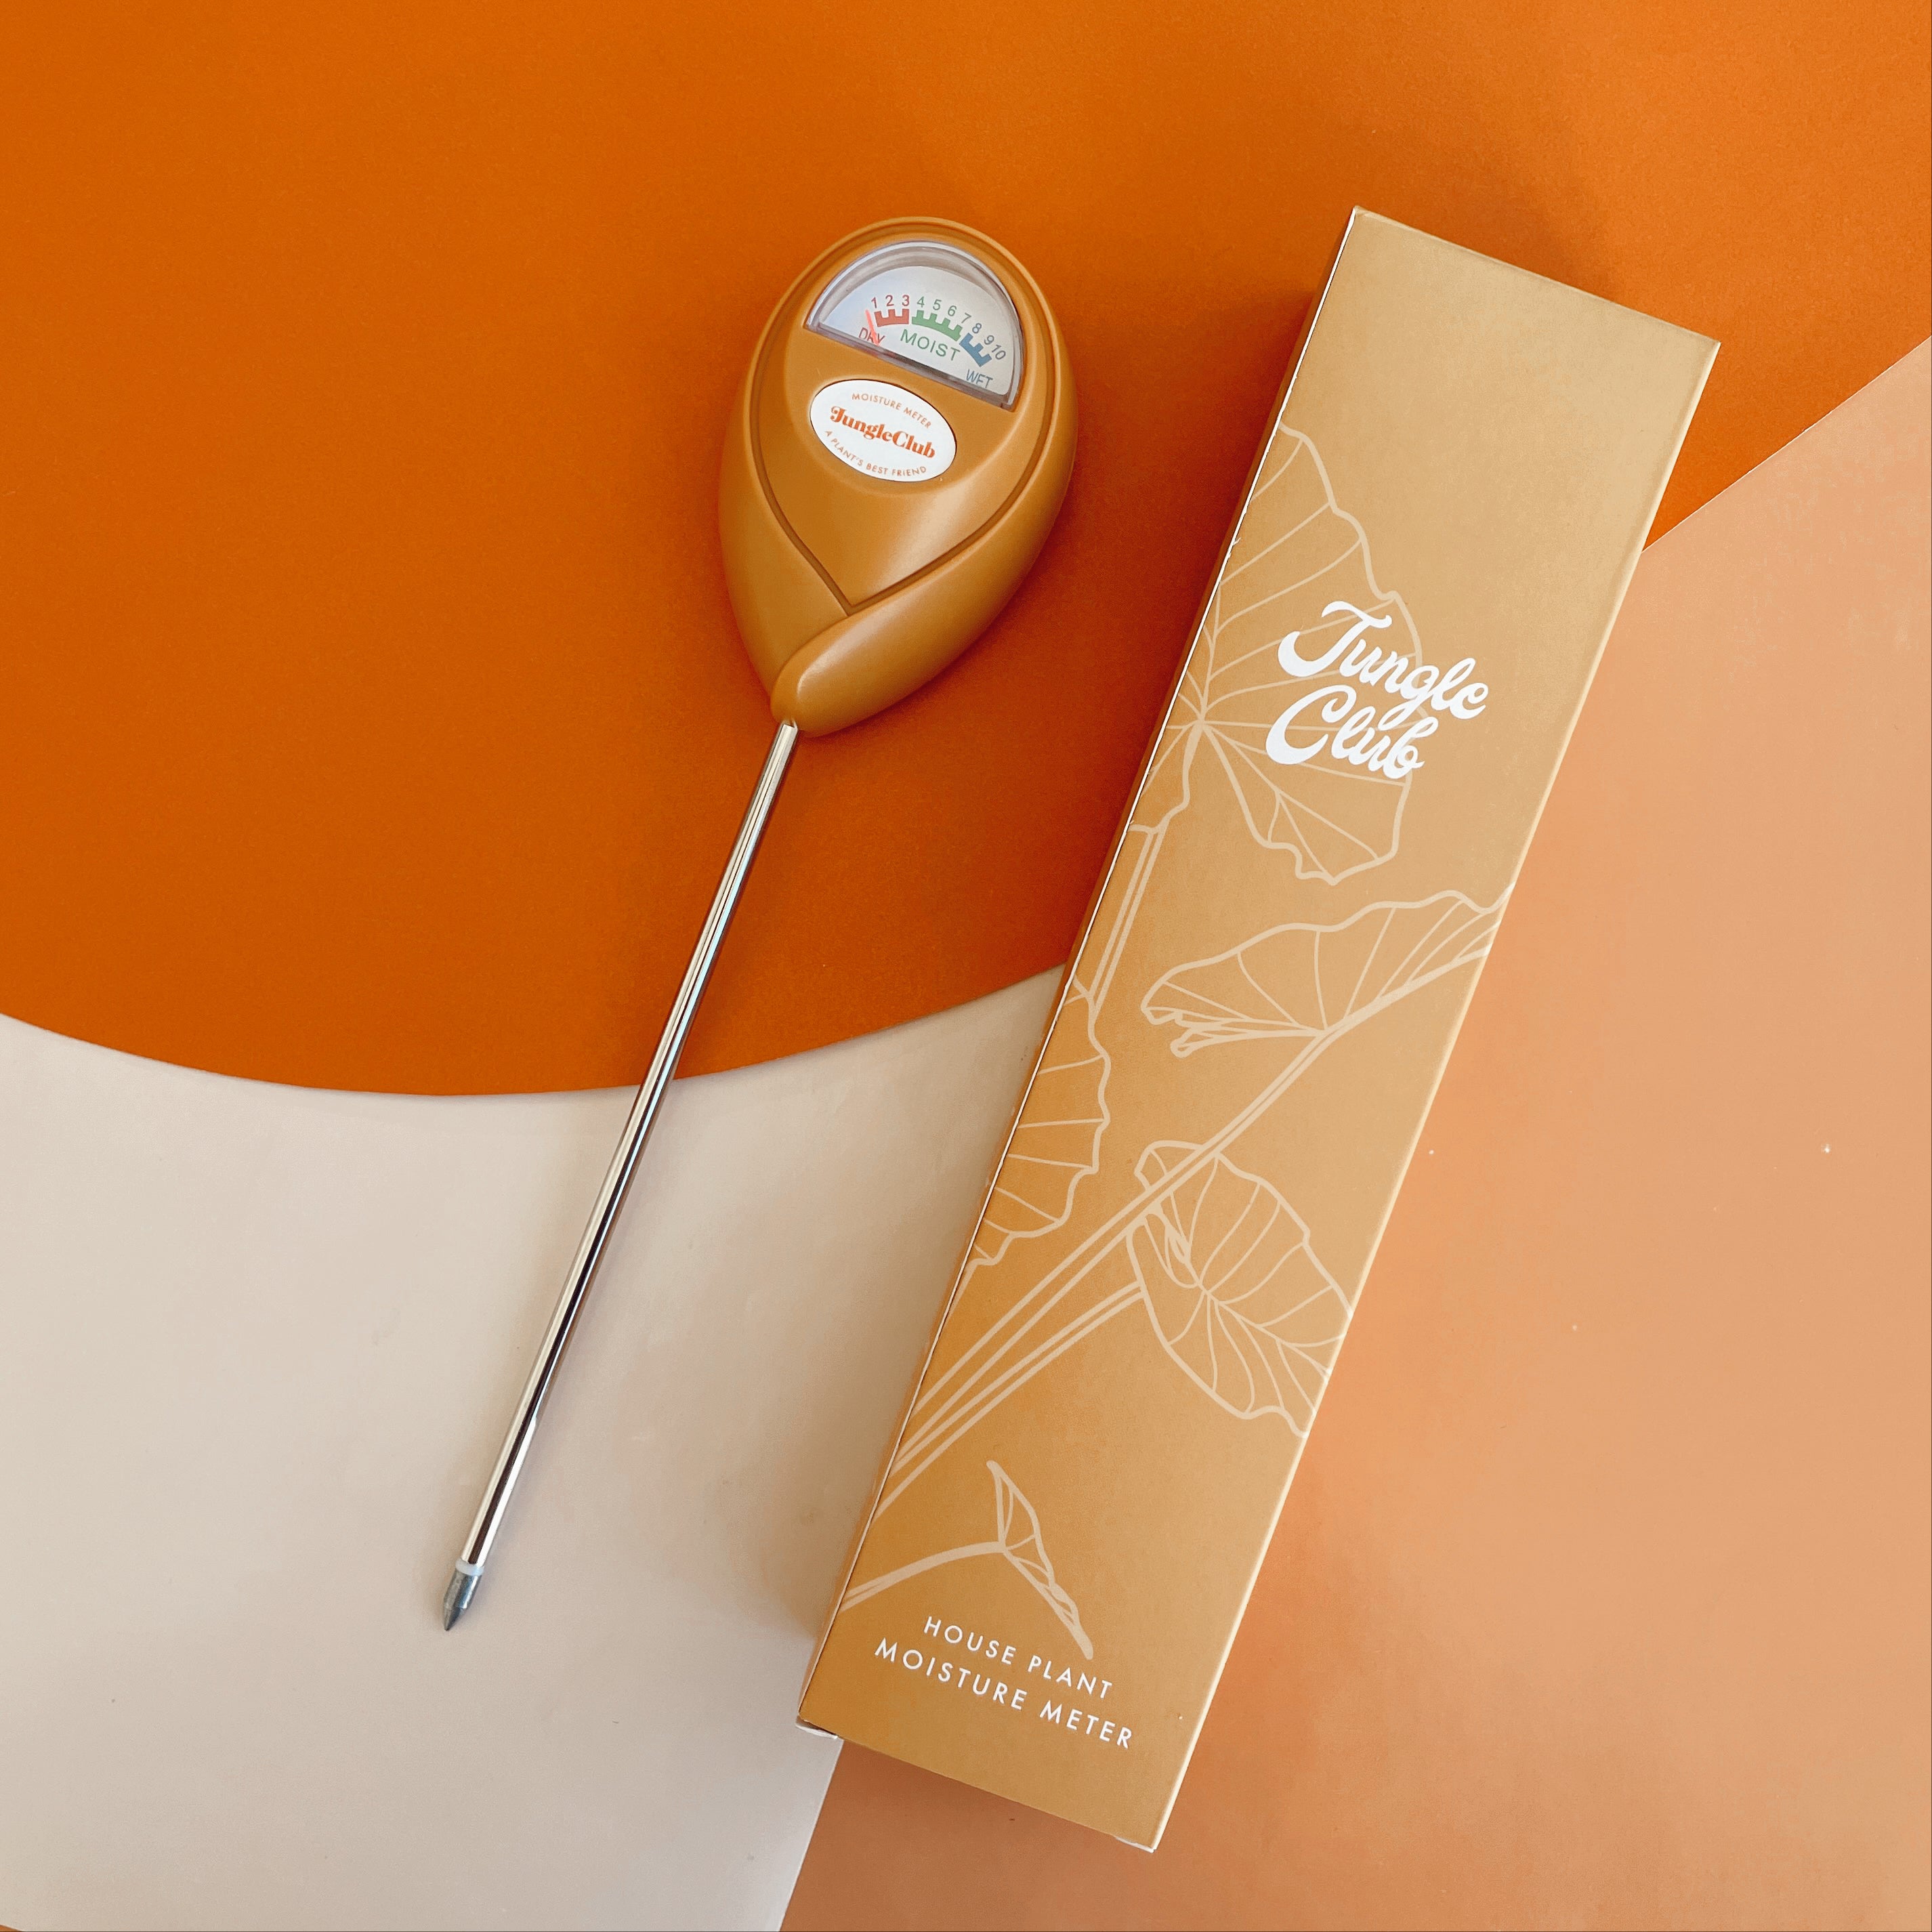 An orange moisture meter with dial at top that indicates dry moist of wet conditions for a plant lays on top of a bright orange background paper.  A peach colored paper intersects the right side of the image and the box that the moisture meter comes in sits on top of the paper. It reads &quot;Jungle Club&quot; and has the outlines of an alocasia grapically designed in white.